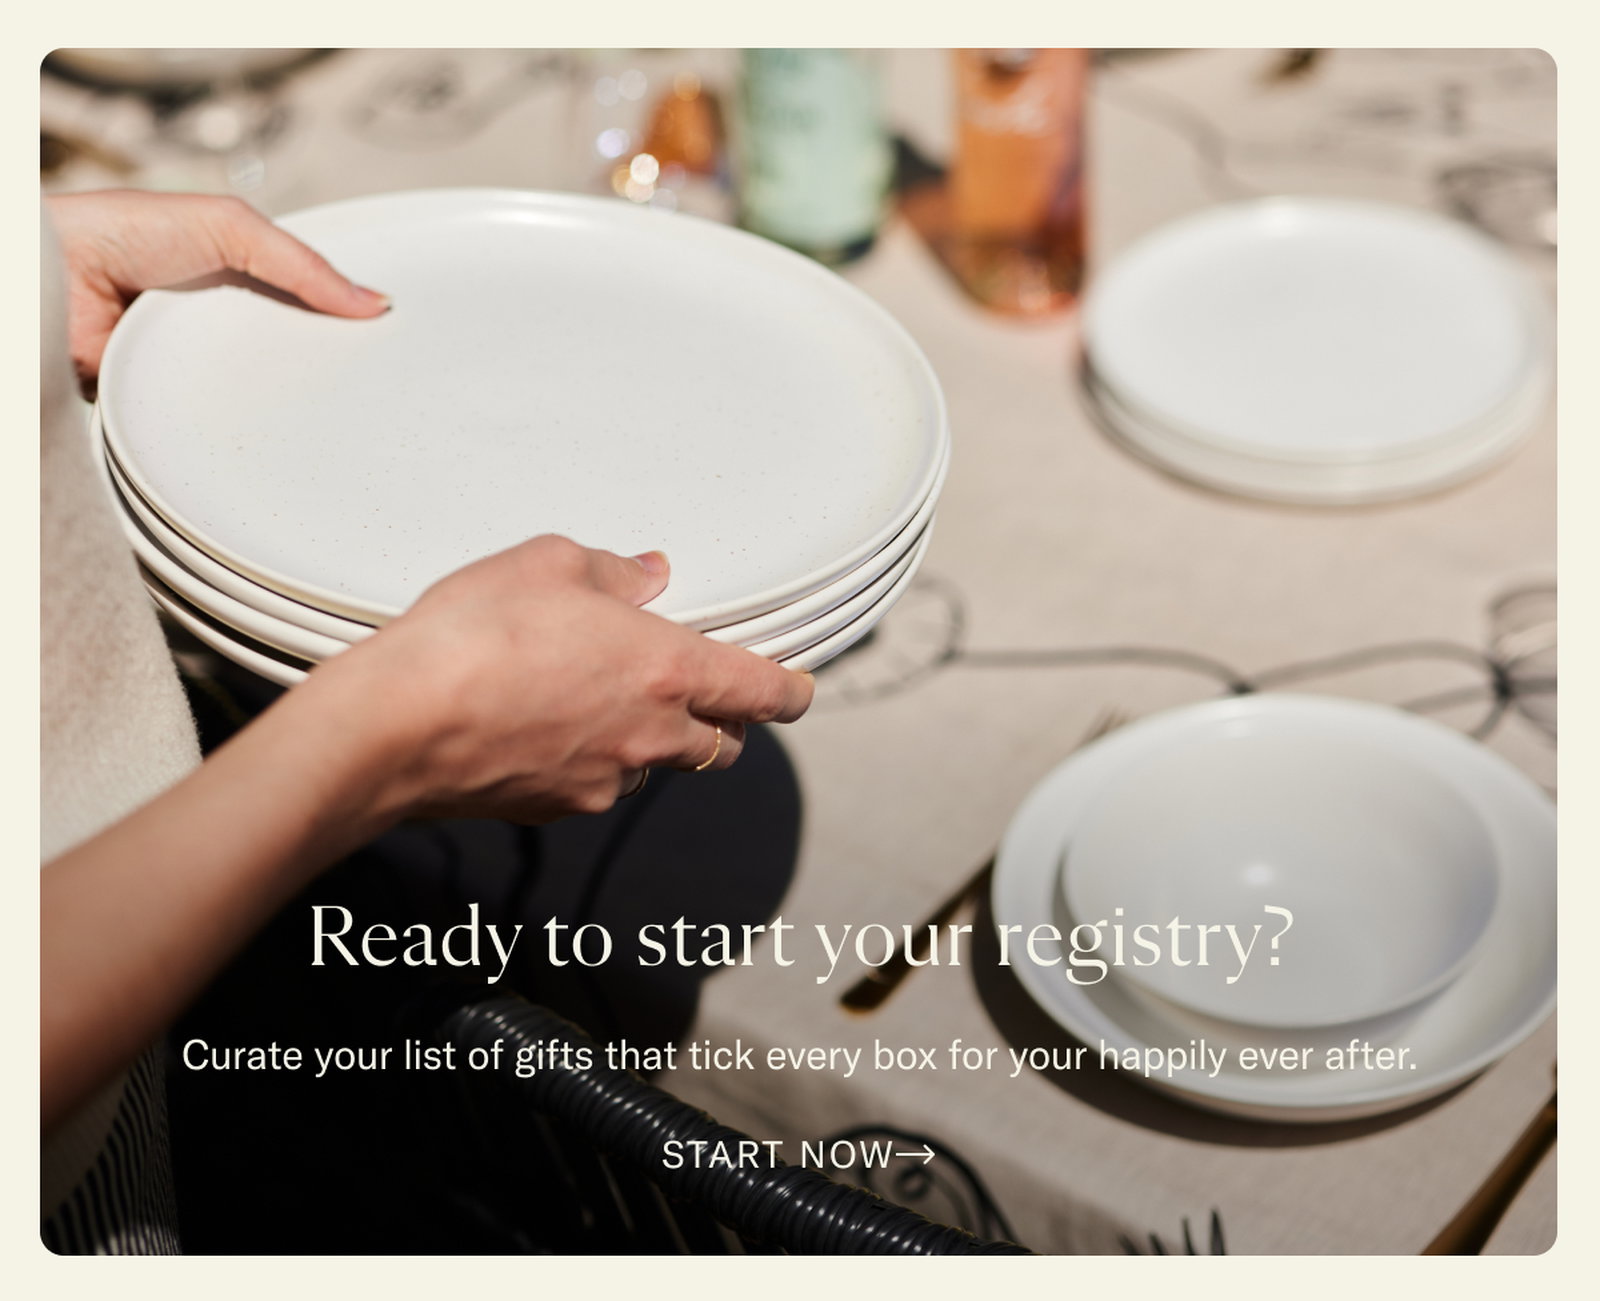 Ready to start your registry?